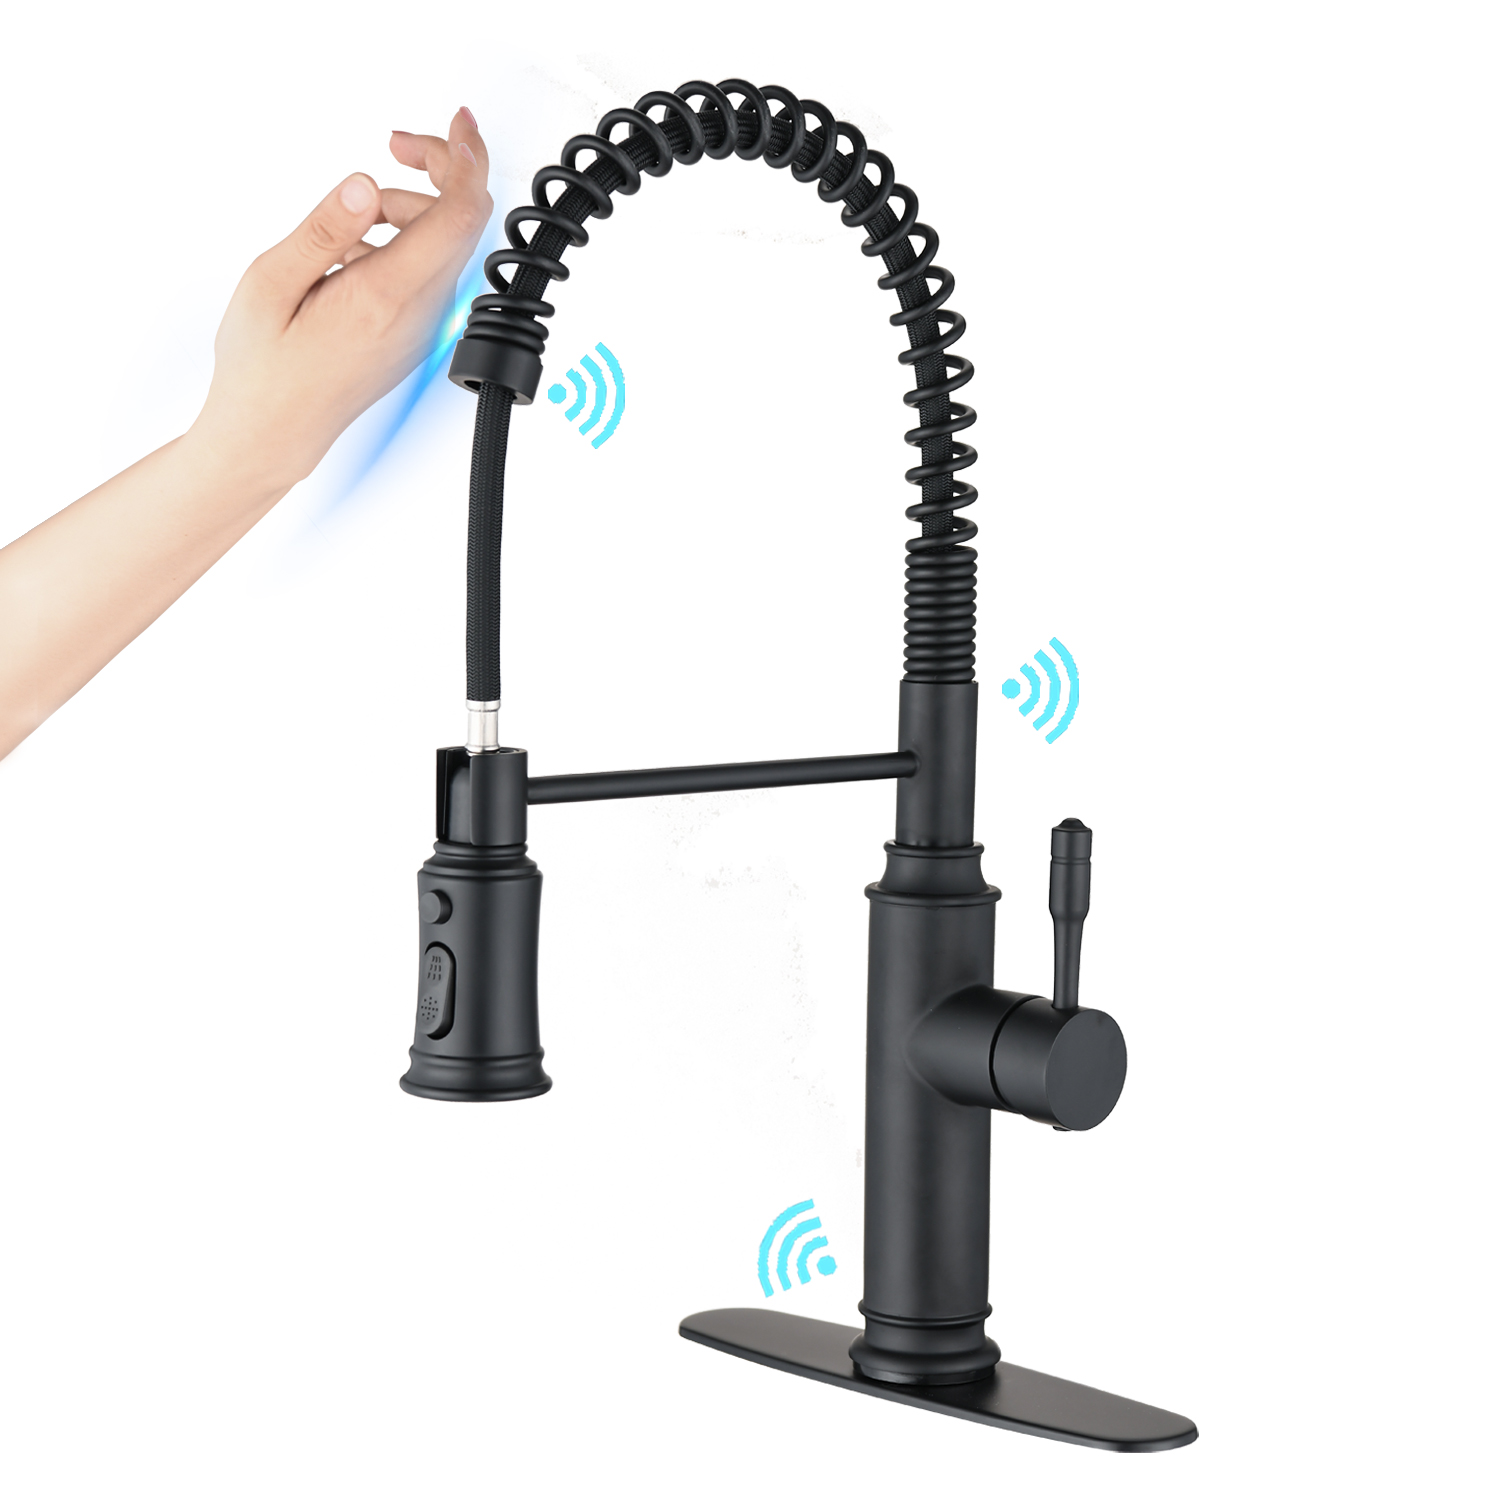 Touch Kitchen Faucet with Pull Down Sprayer-CASAINC